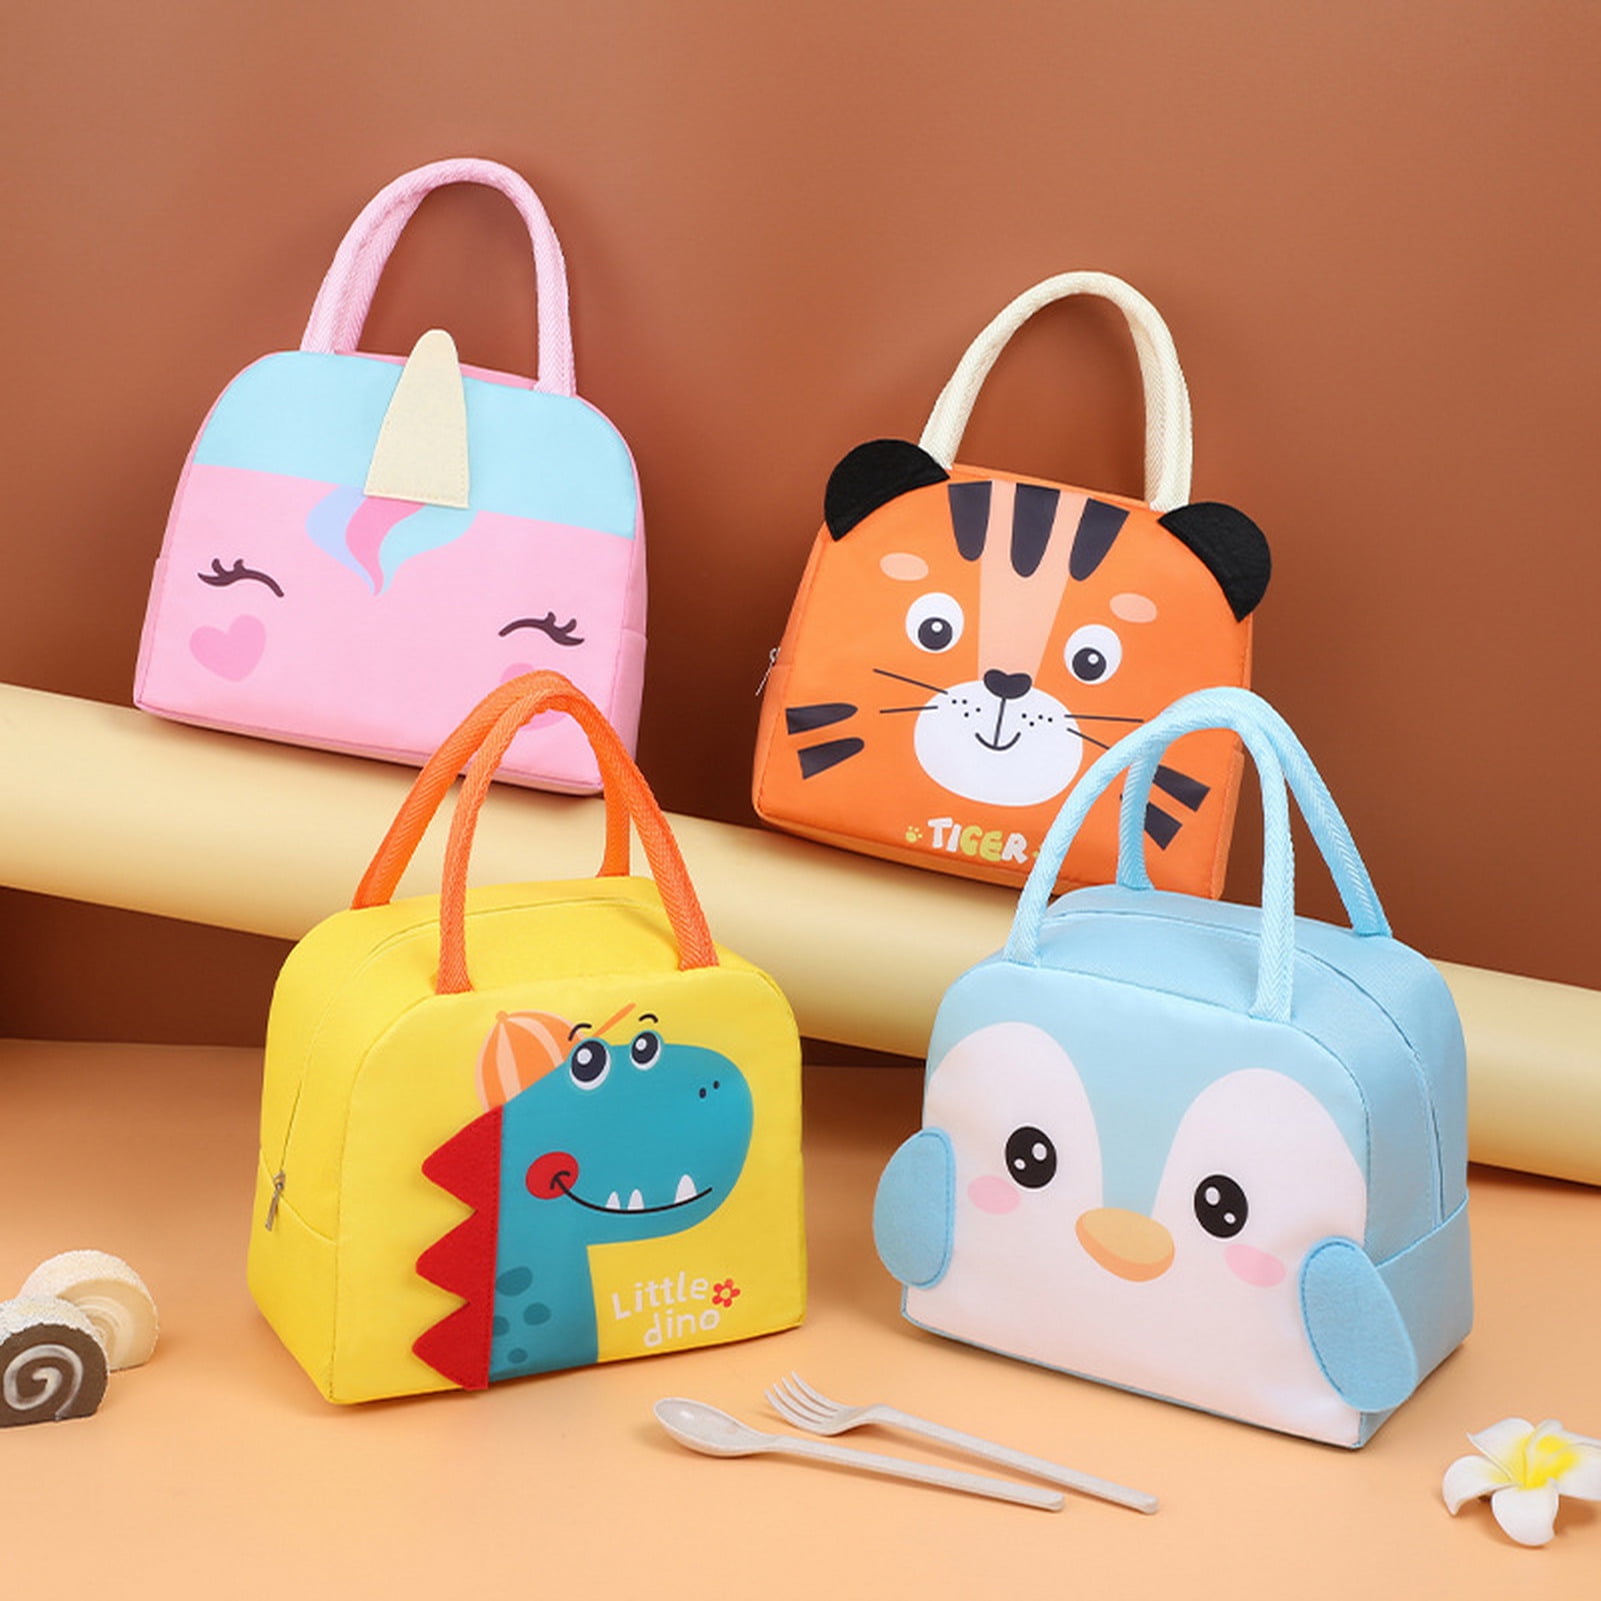 3-D Cartoon Animal Pattern Insulated Lunch Box Bag with Large Capacity